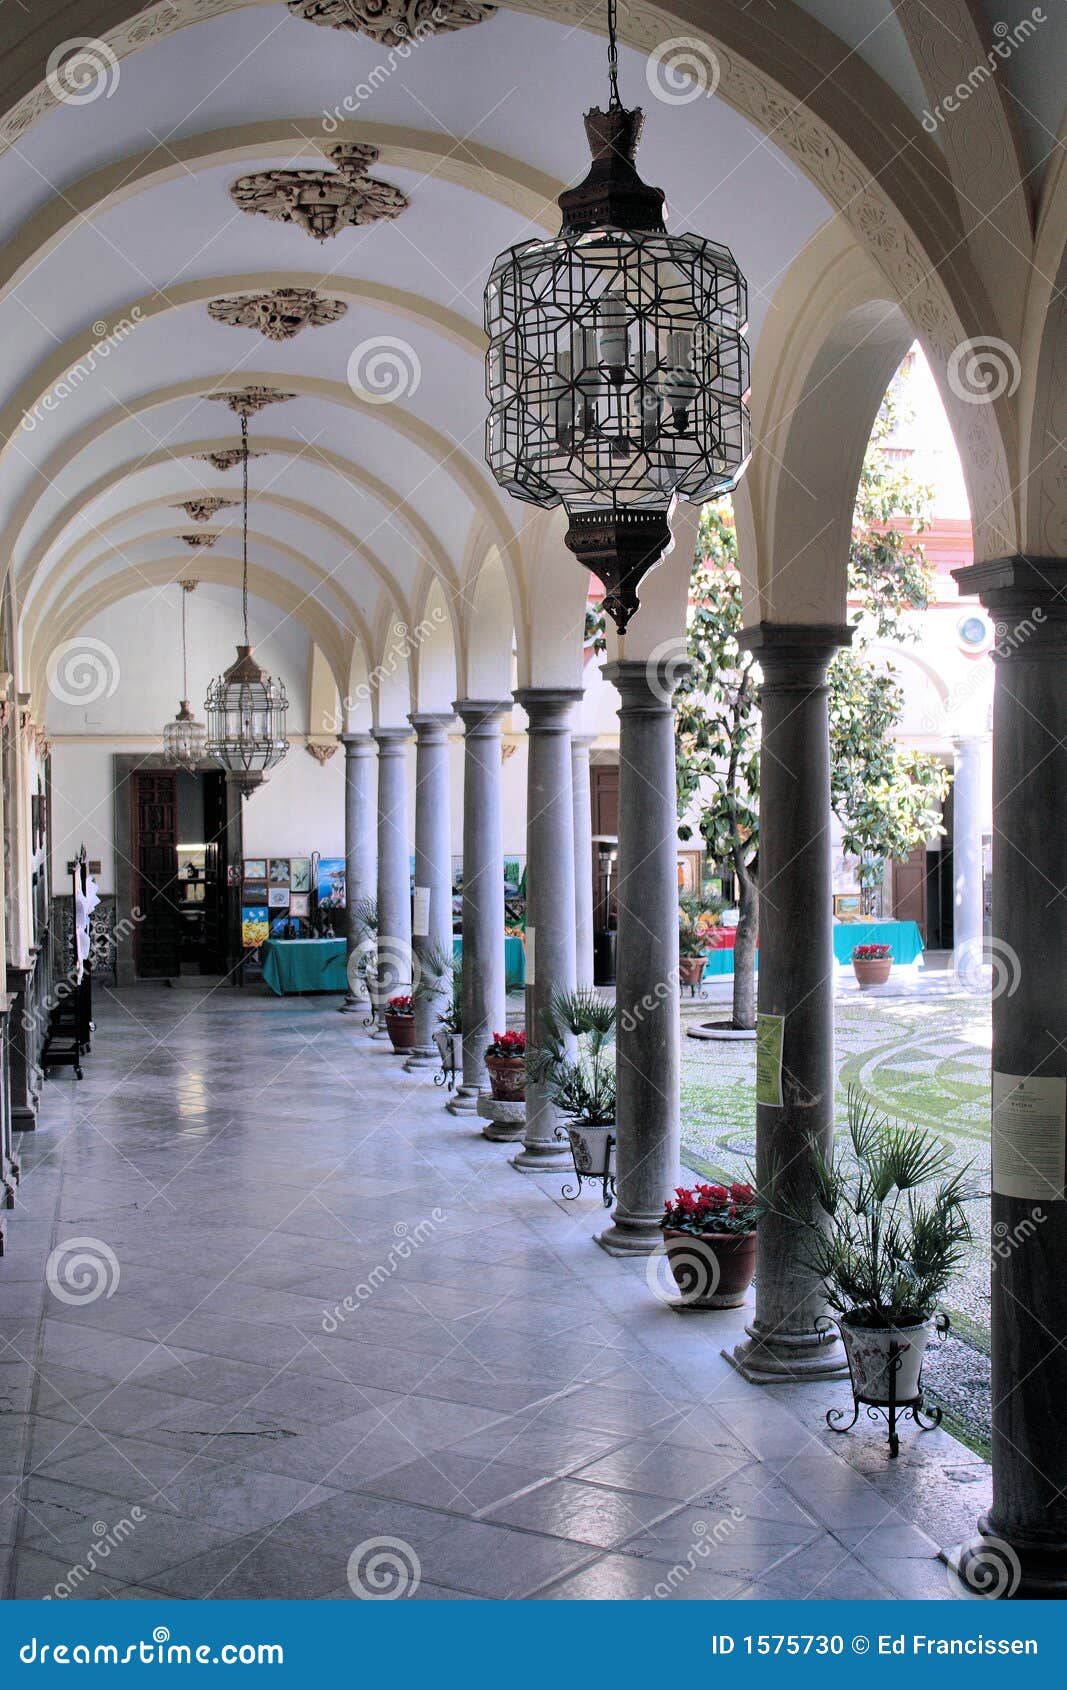 the courtyard of the city hall in granada, spain.